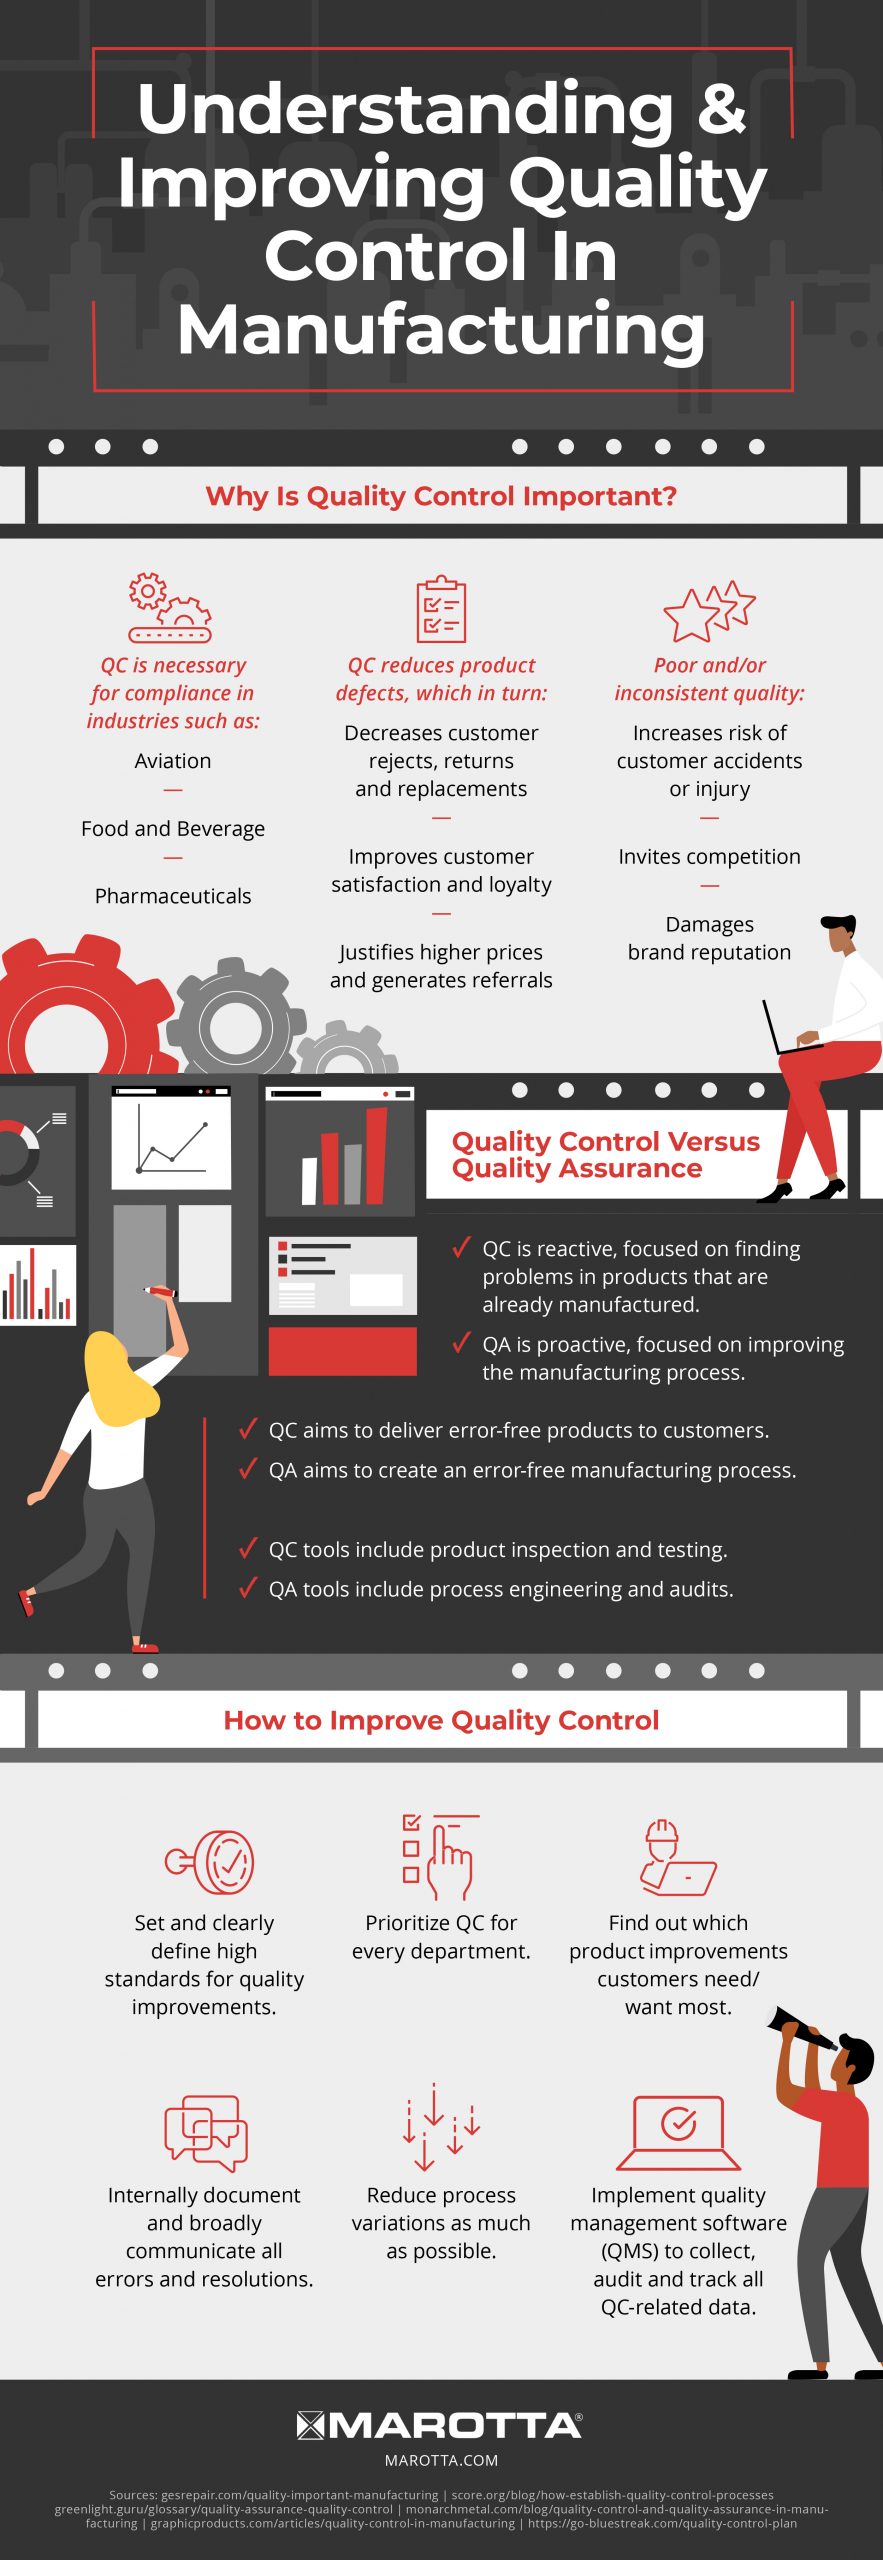 improving quality control in manufacturing infographic